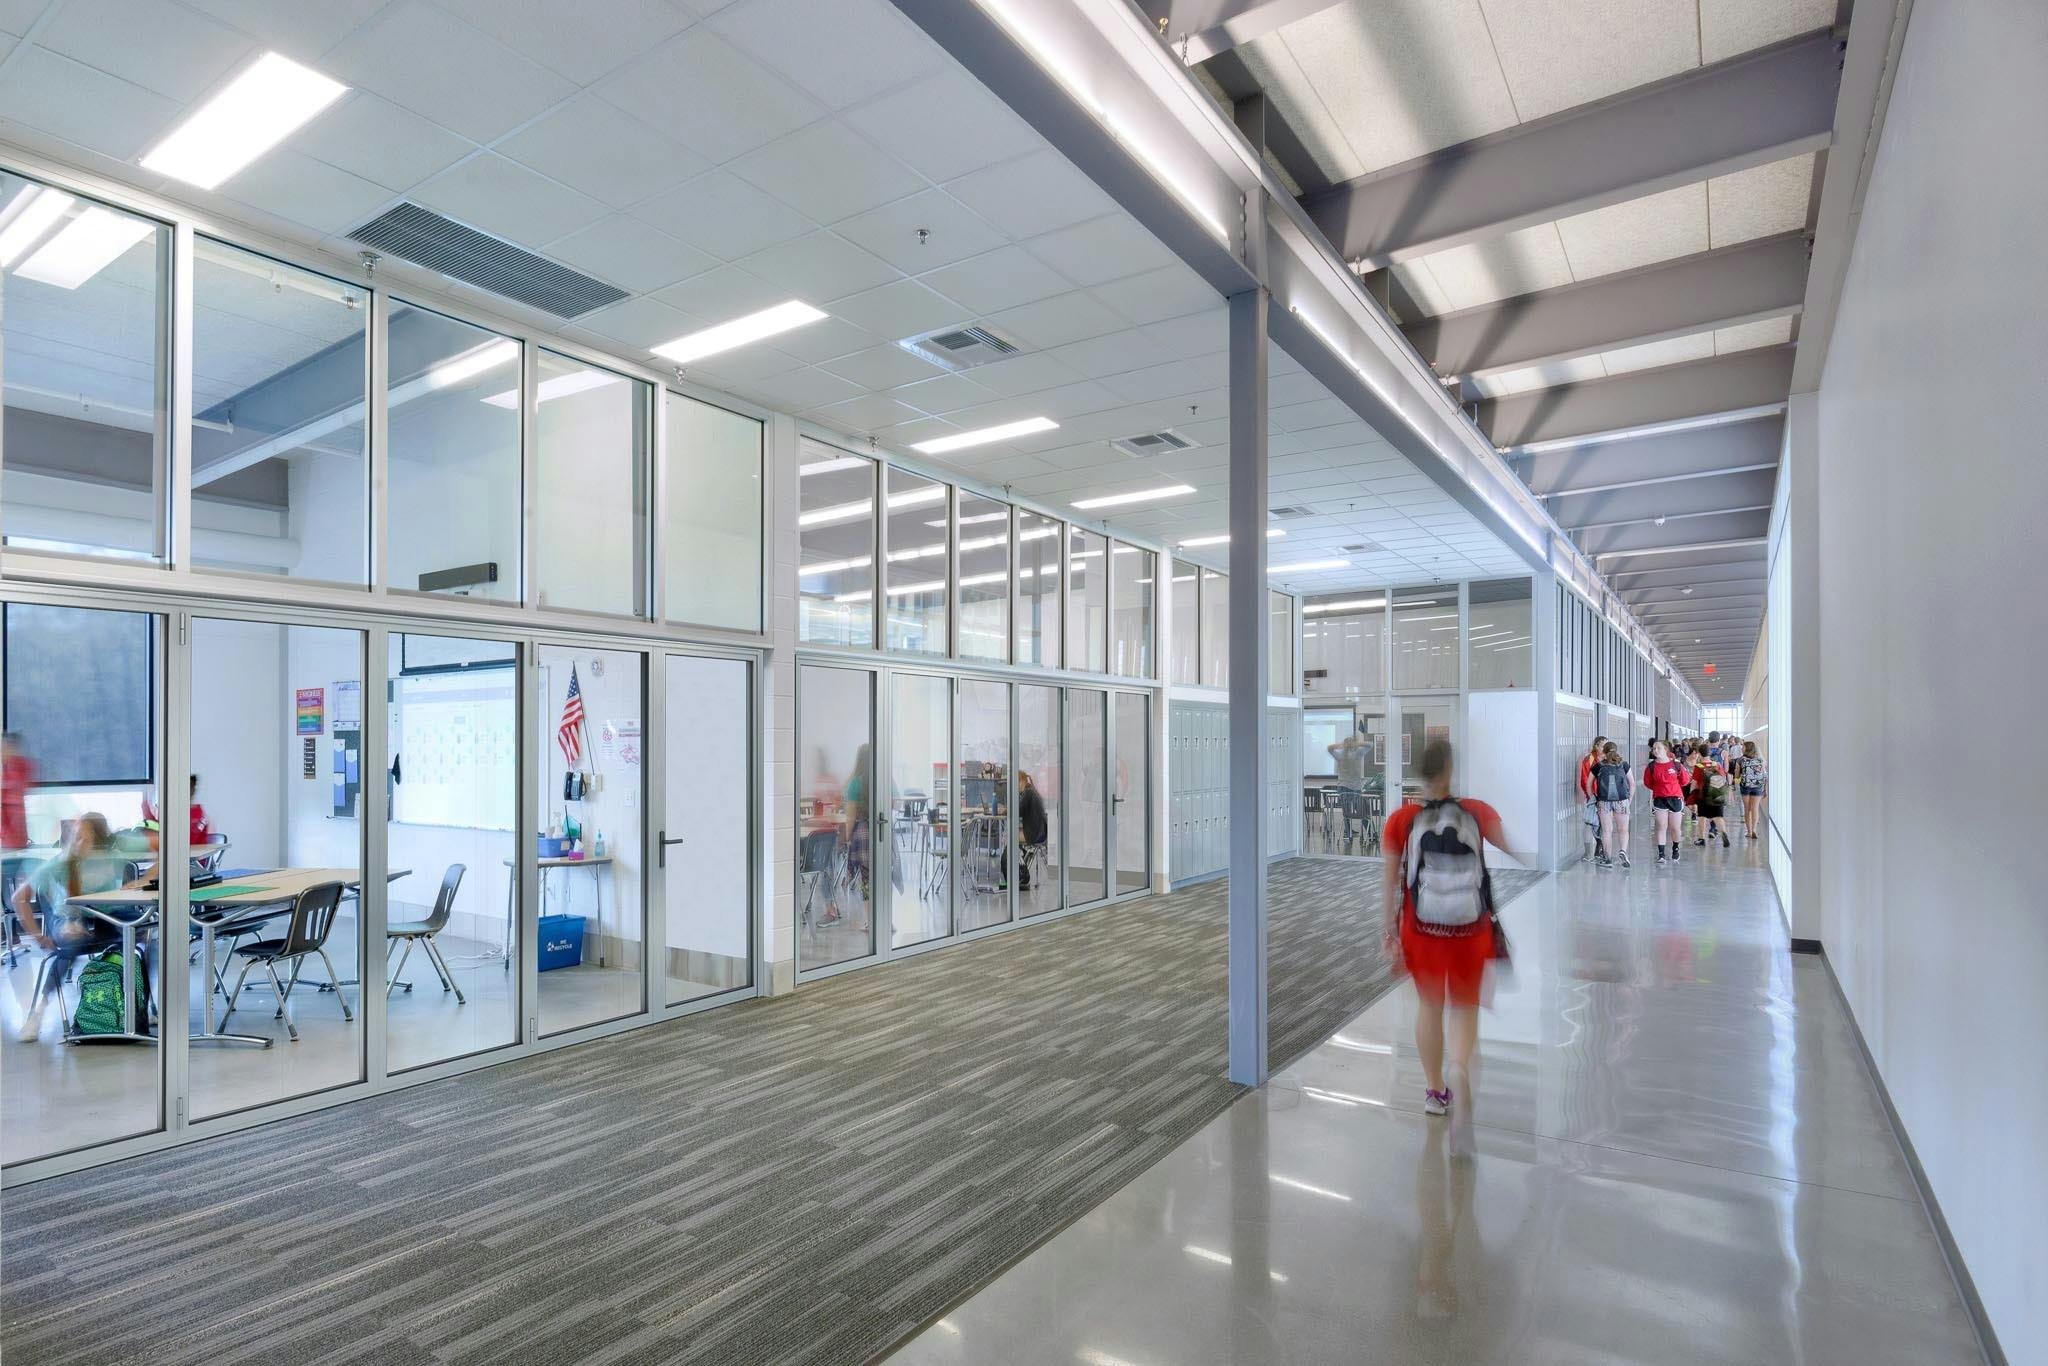 sound-rated opening glass walls in 21st Century classroom design for acoustical buffering to hallway